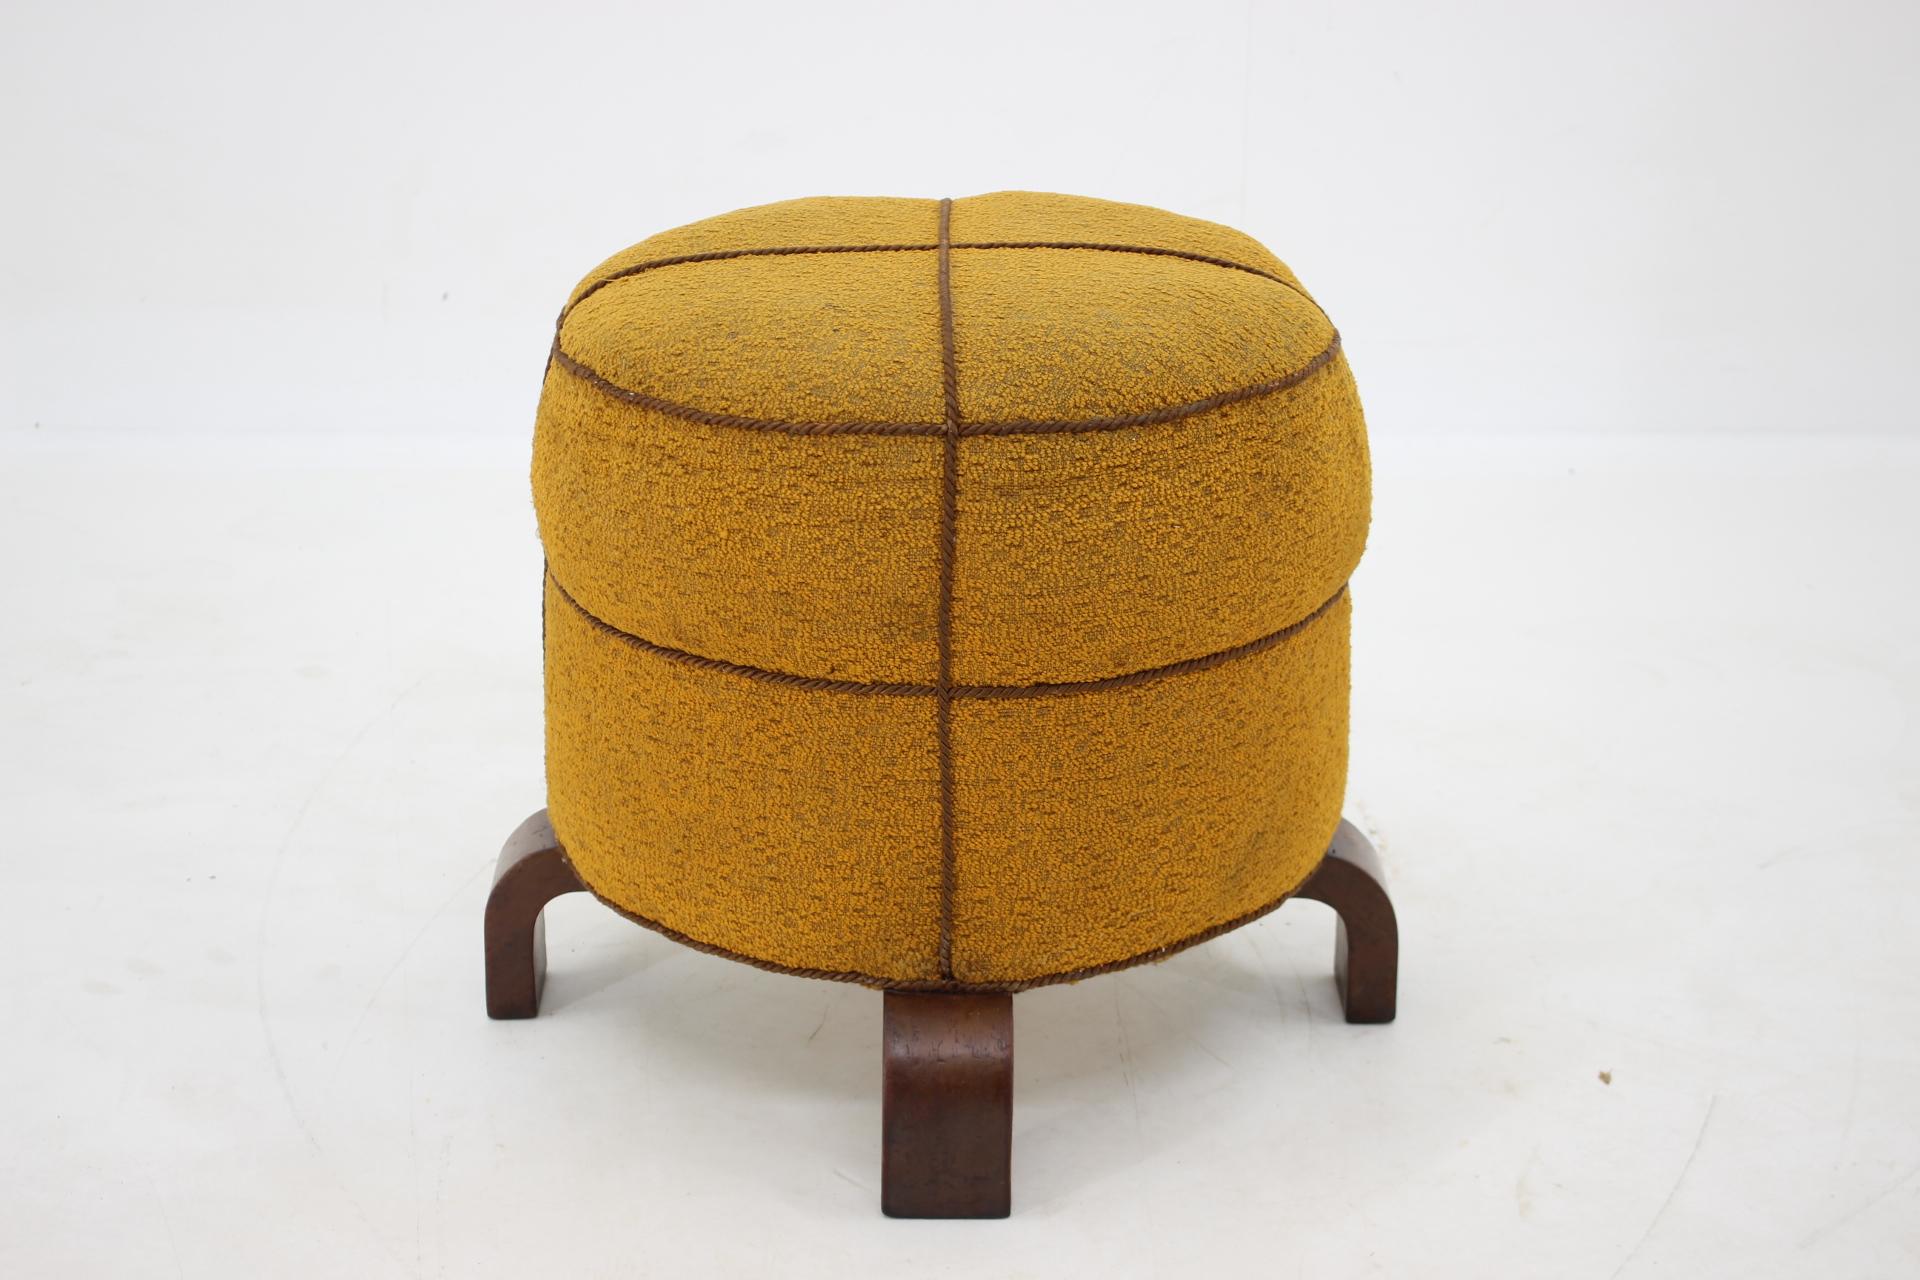 - Made in Czechoslovakia, around 1930s
- Made of wood, fabric
- Original upholstery, suitable for a new one
- Original condition.
   